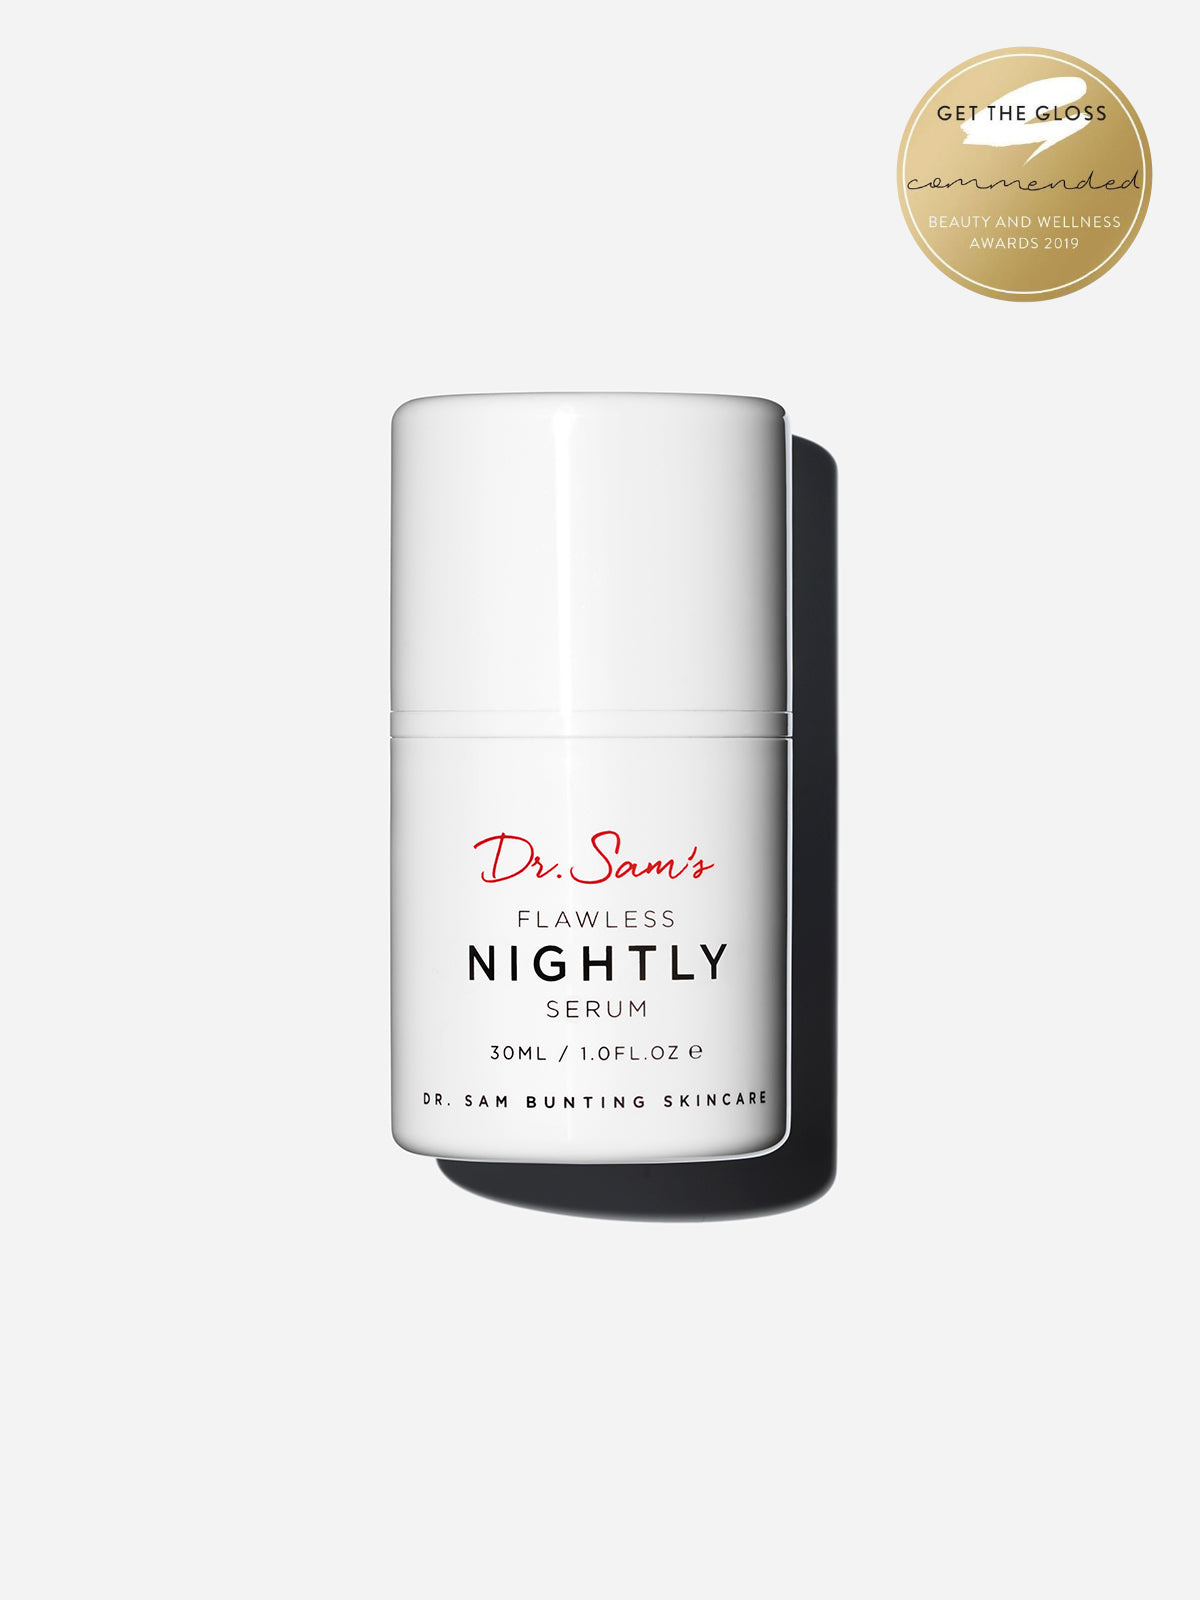 Dr Sam's Flawless Nightly 2% Retinoid Serum featuring Get The Gloss Commended Award for Beauty and Wellness 2019